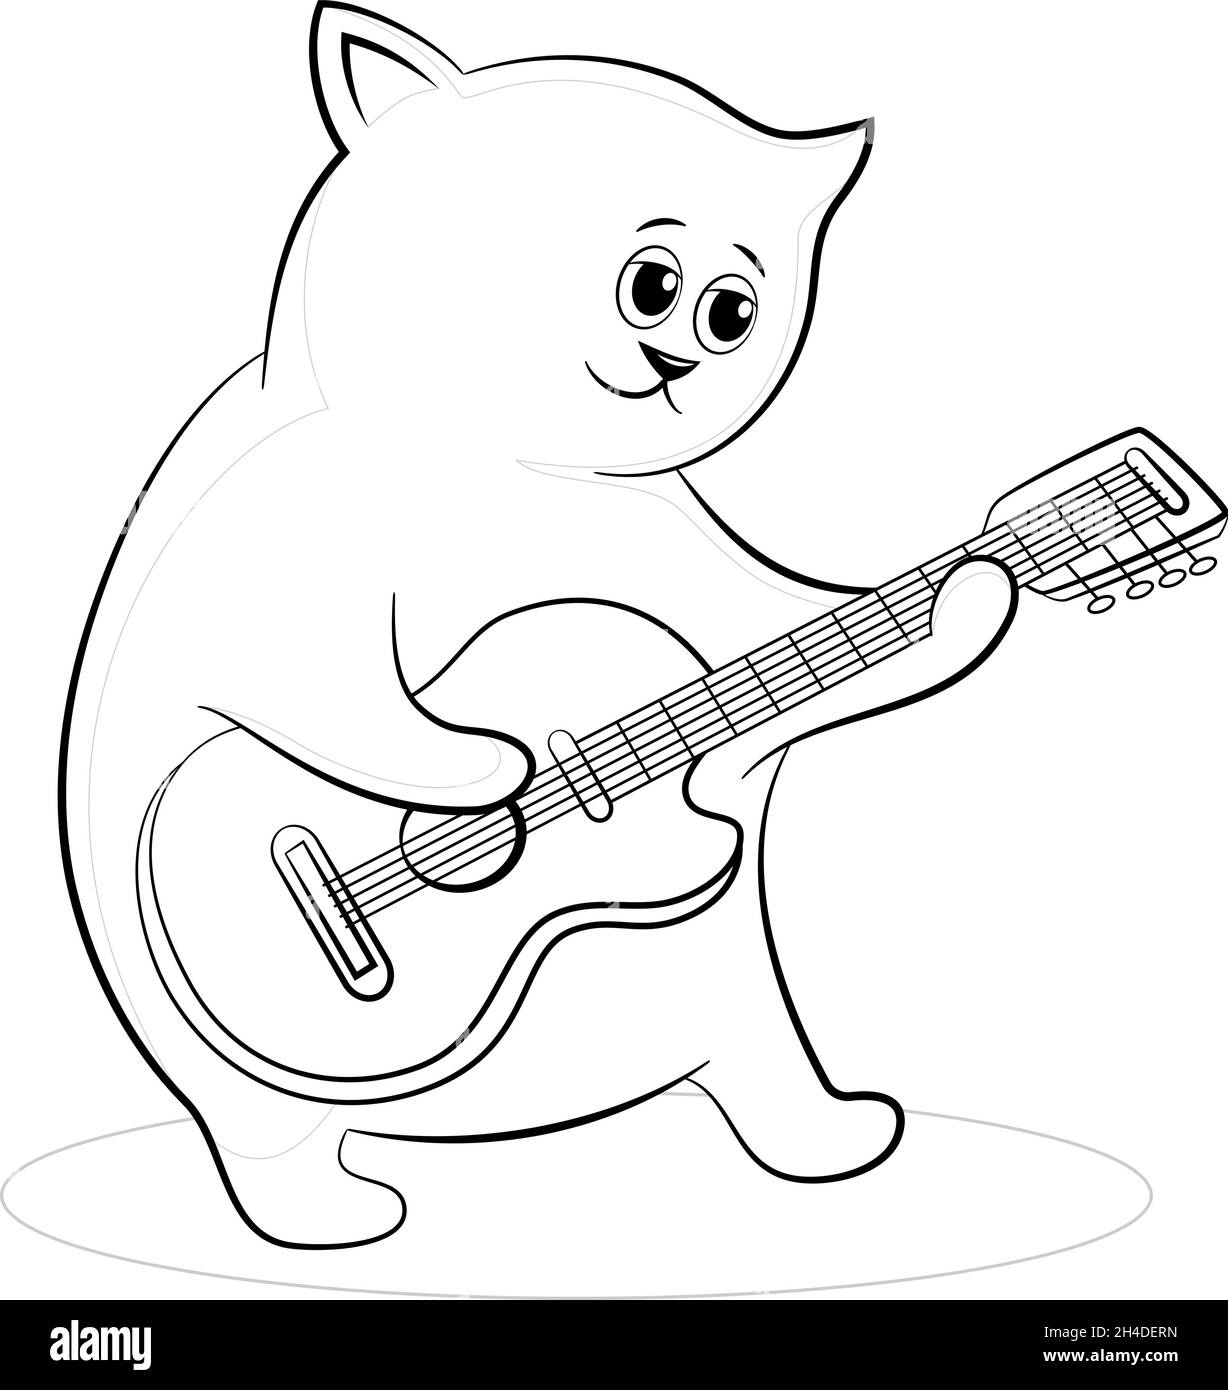 Cartoon Character Cat Musician with Guitar, Black Contours Isolated on White Background. Vector Stock Vector